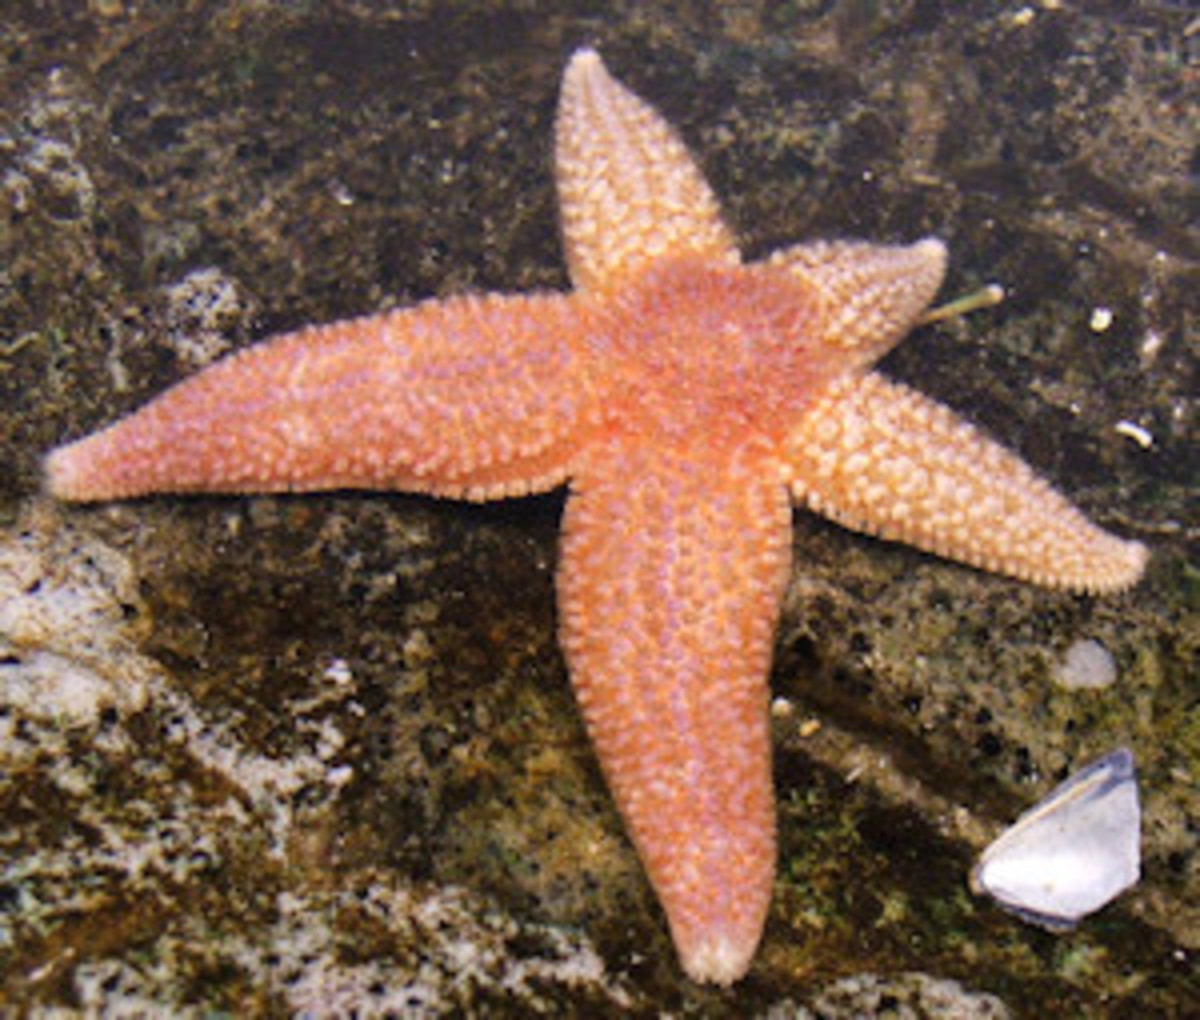 This Sea Star is regenerating three rays. One ray can regenerate a full sea star.